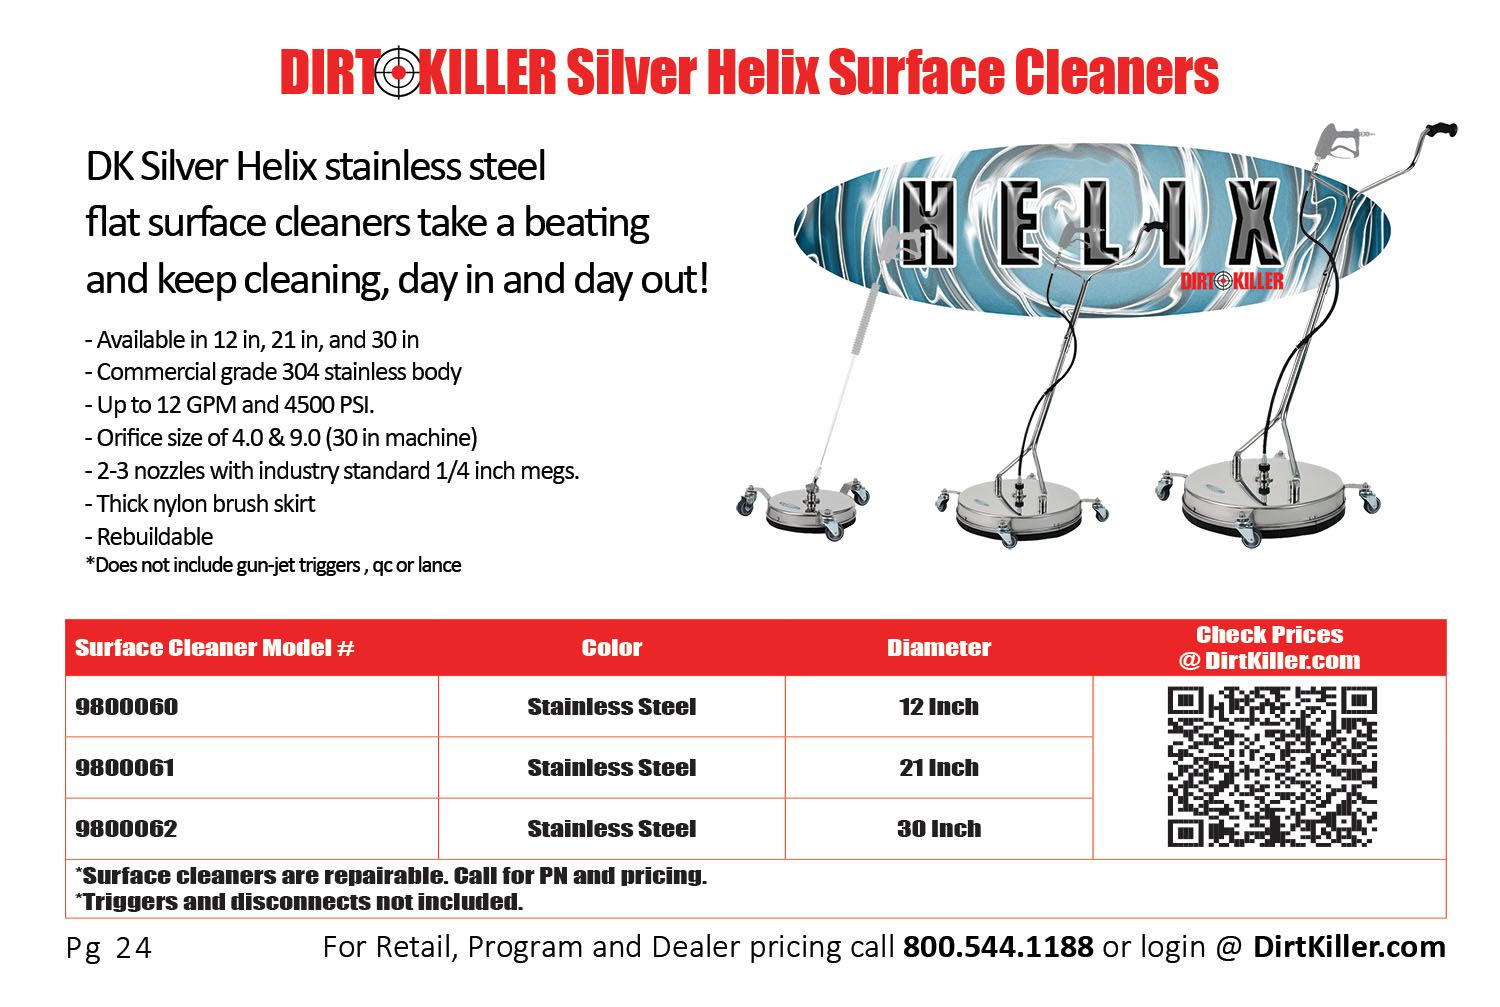 Dirt Killer Pressure Washer Catalog  - Surface Cleaners